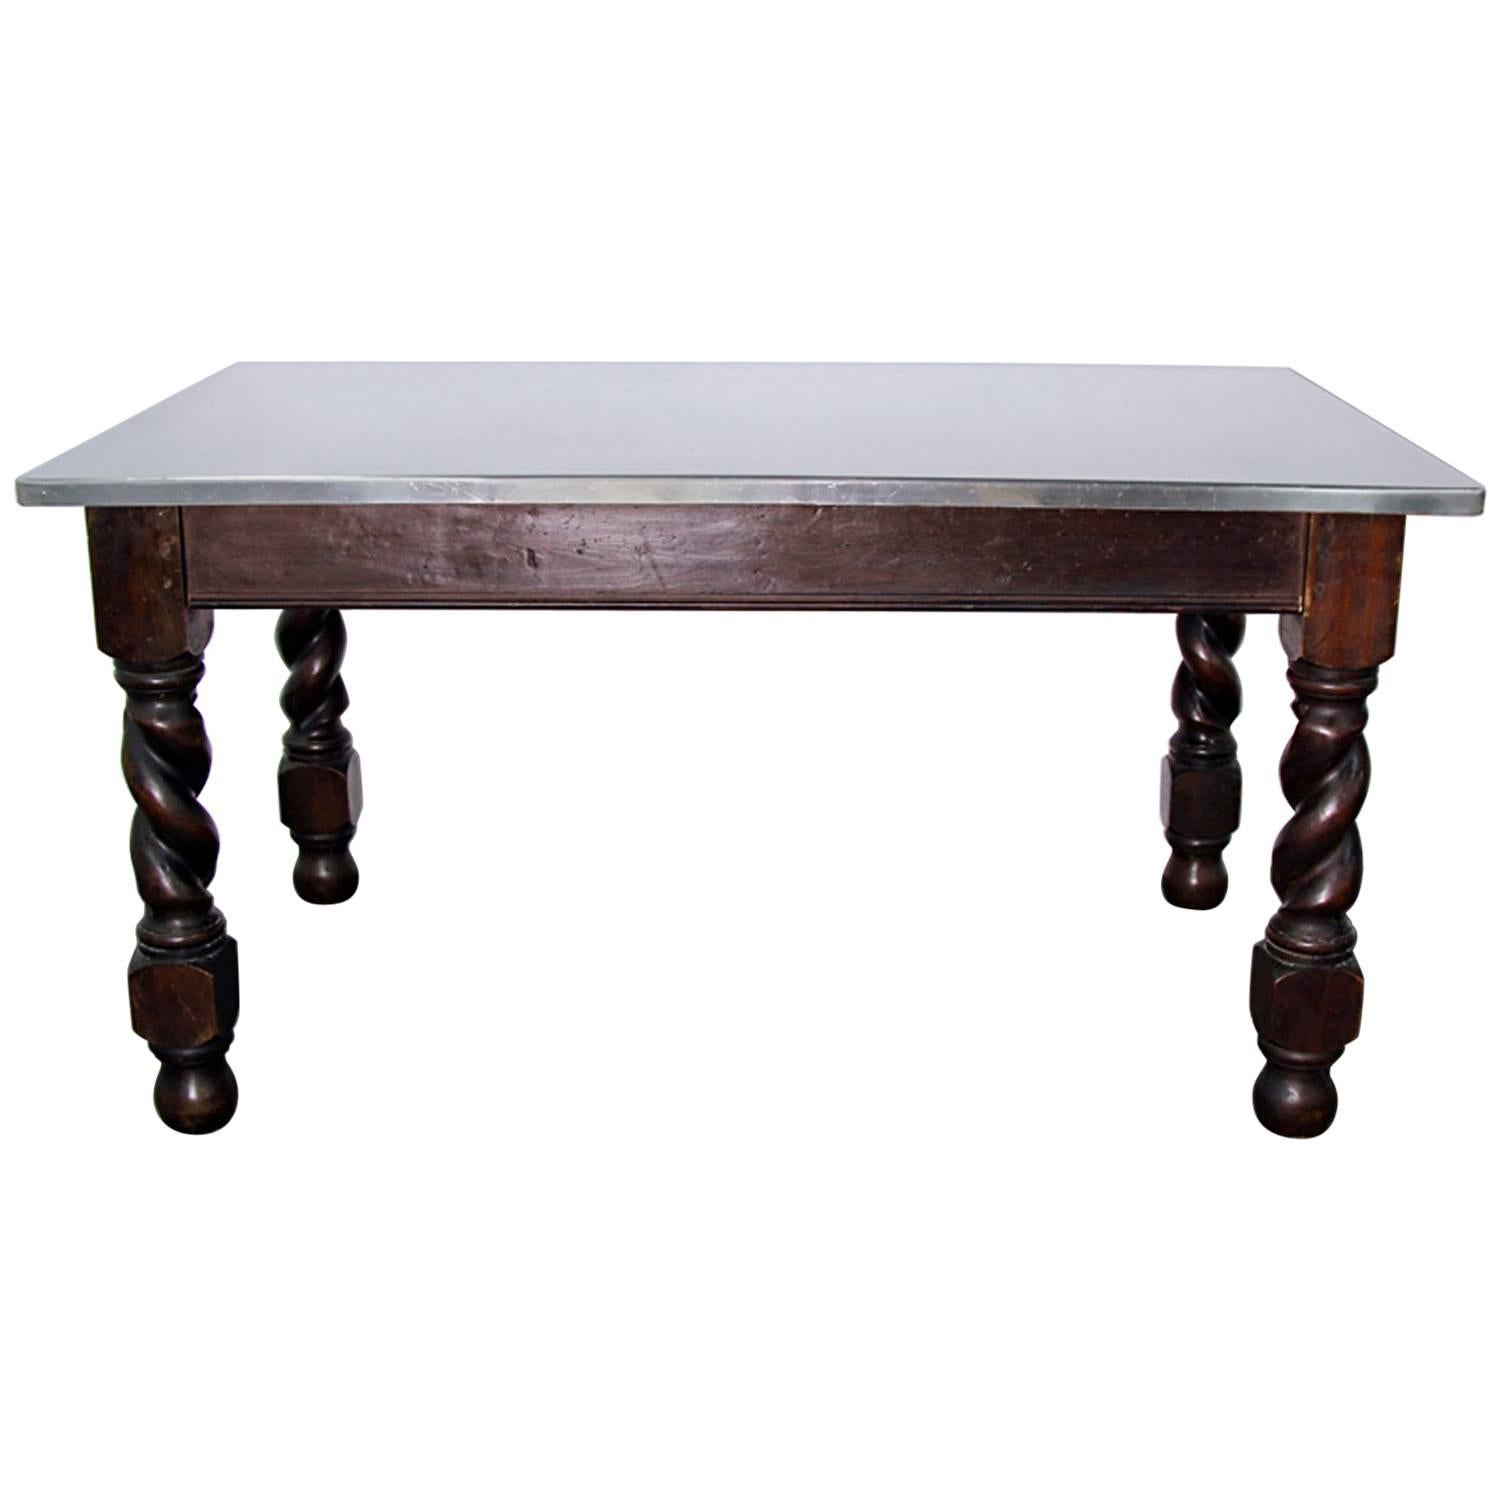 English Stainless Steel Top Table